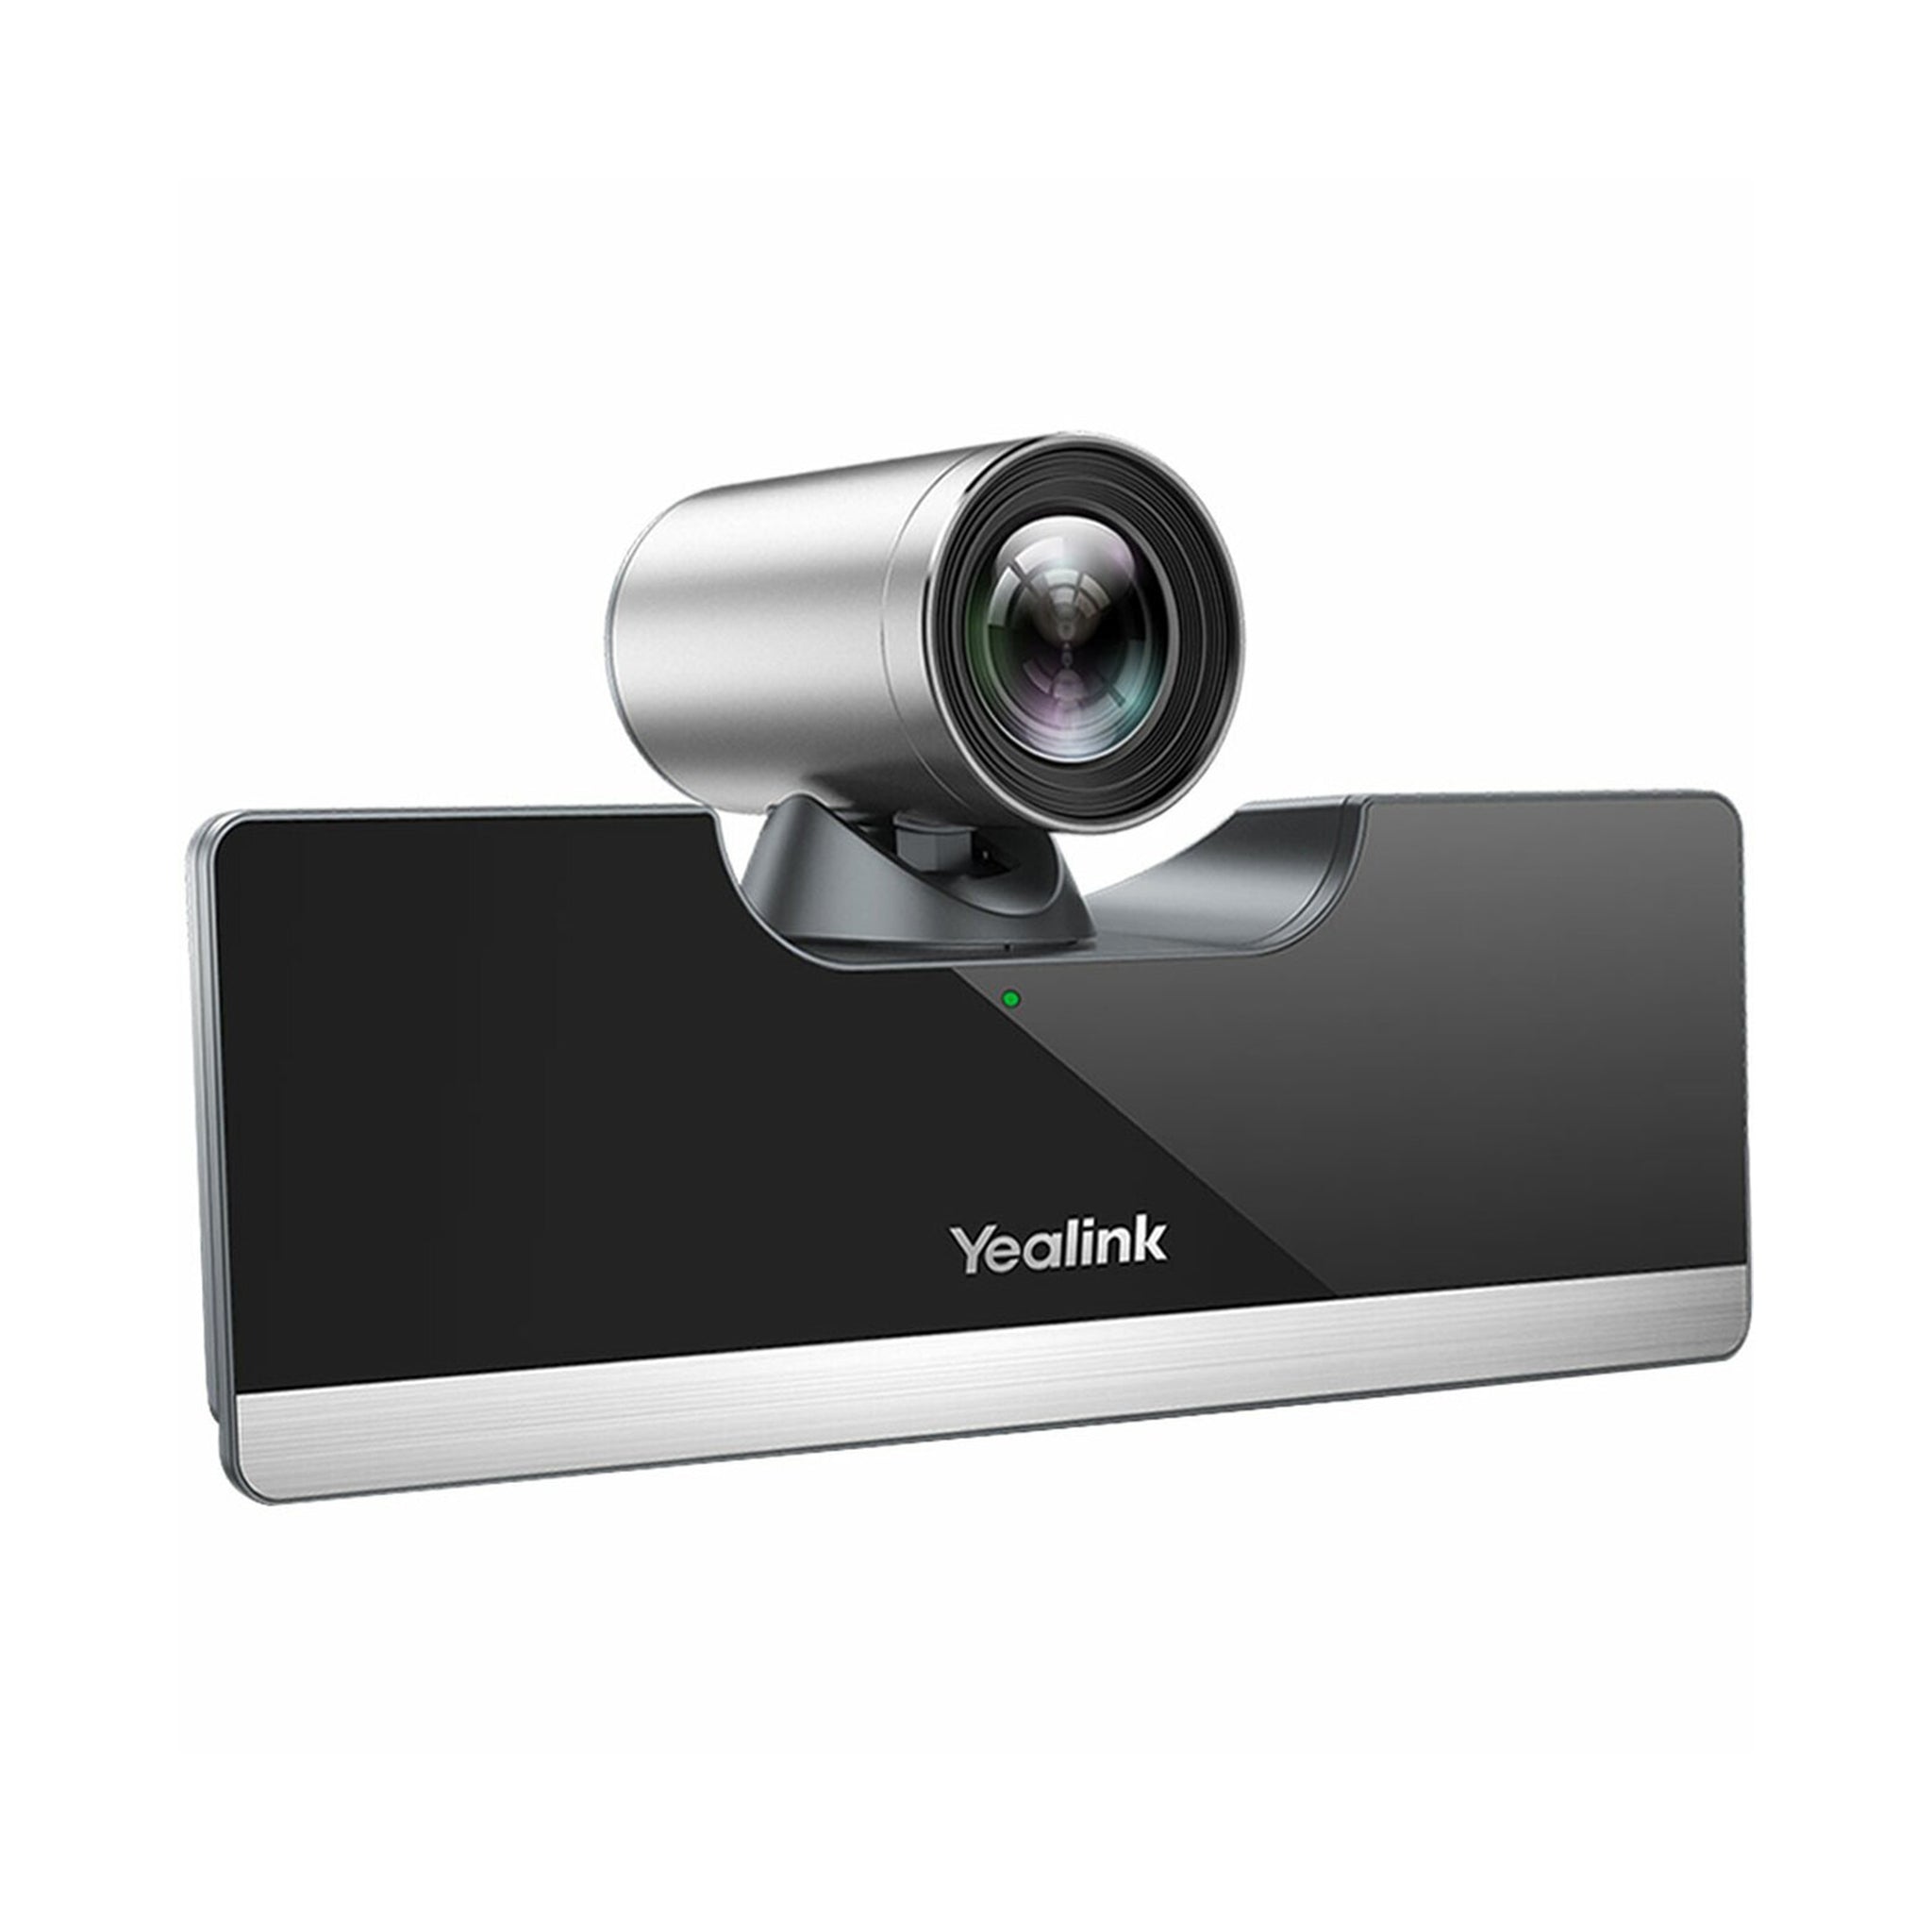 Yealink ZVC500 - Zoom Rooms Video Conferencing ZVC500, UVC50 PTZ Camera | AL-VoIP Store